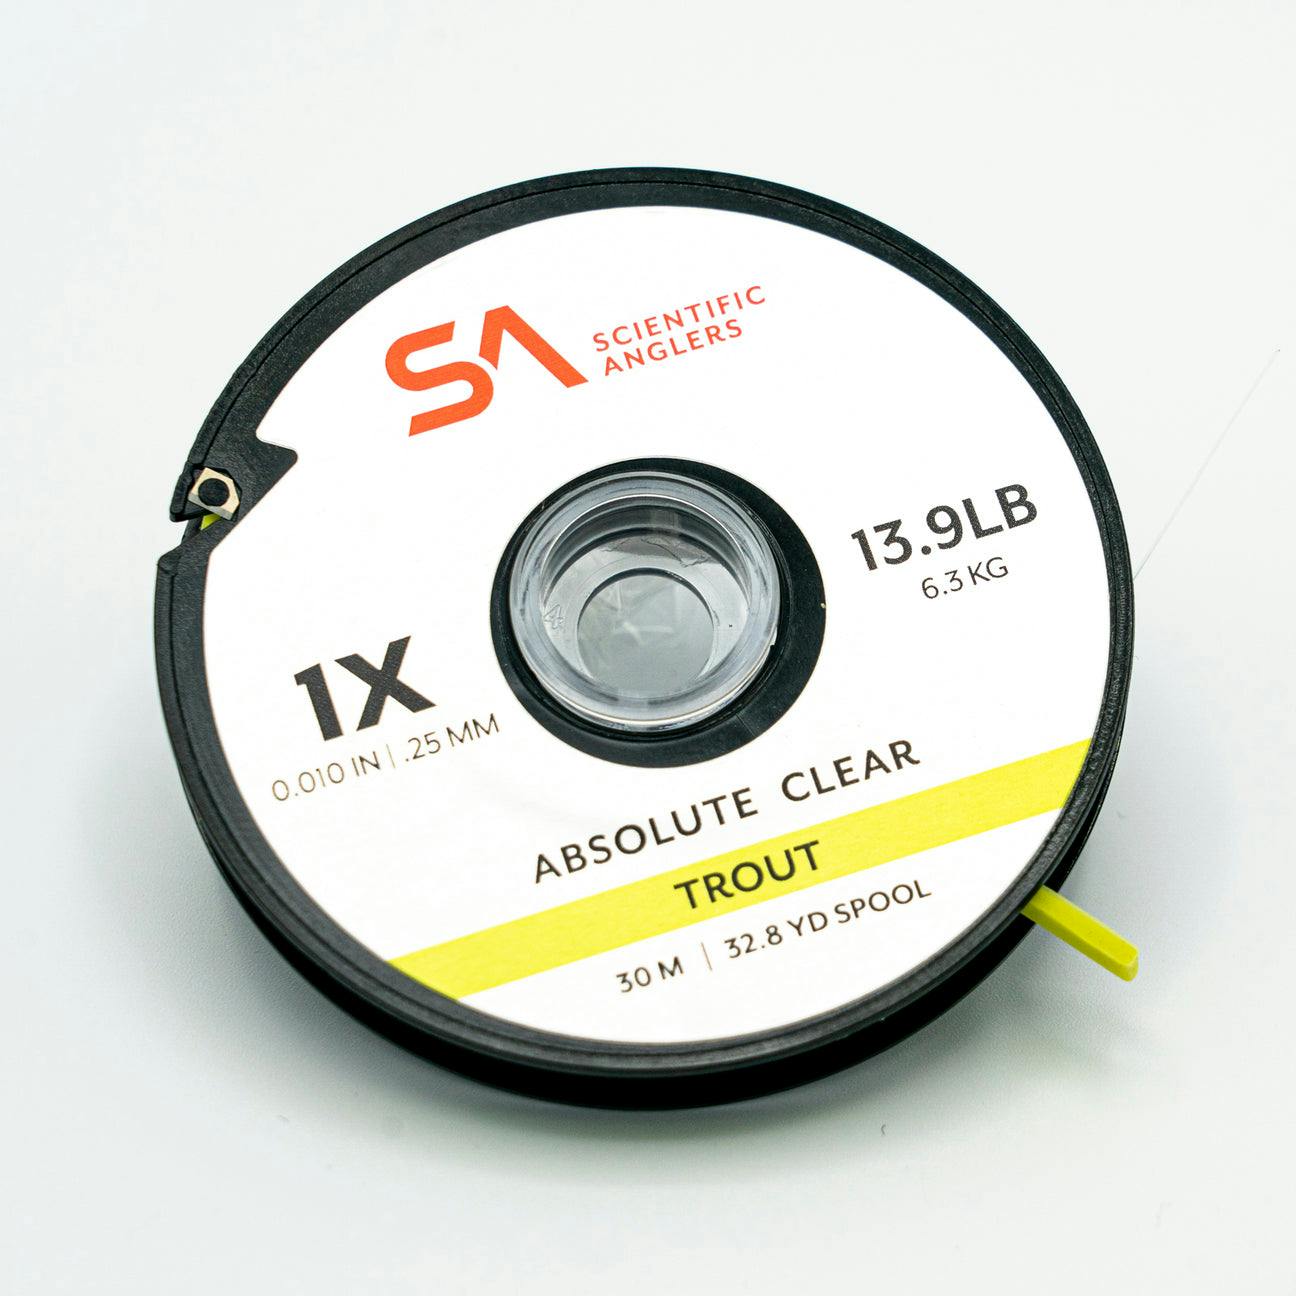 Scientific Anglers Absolute Trout Tippet